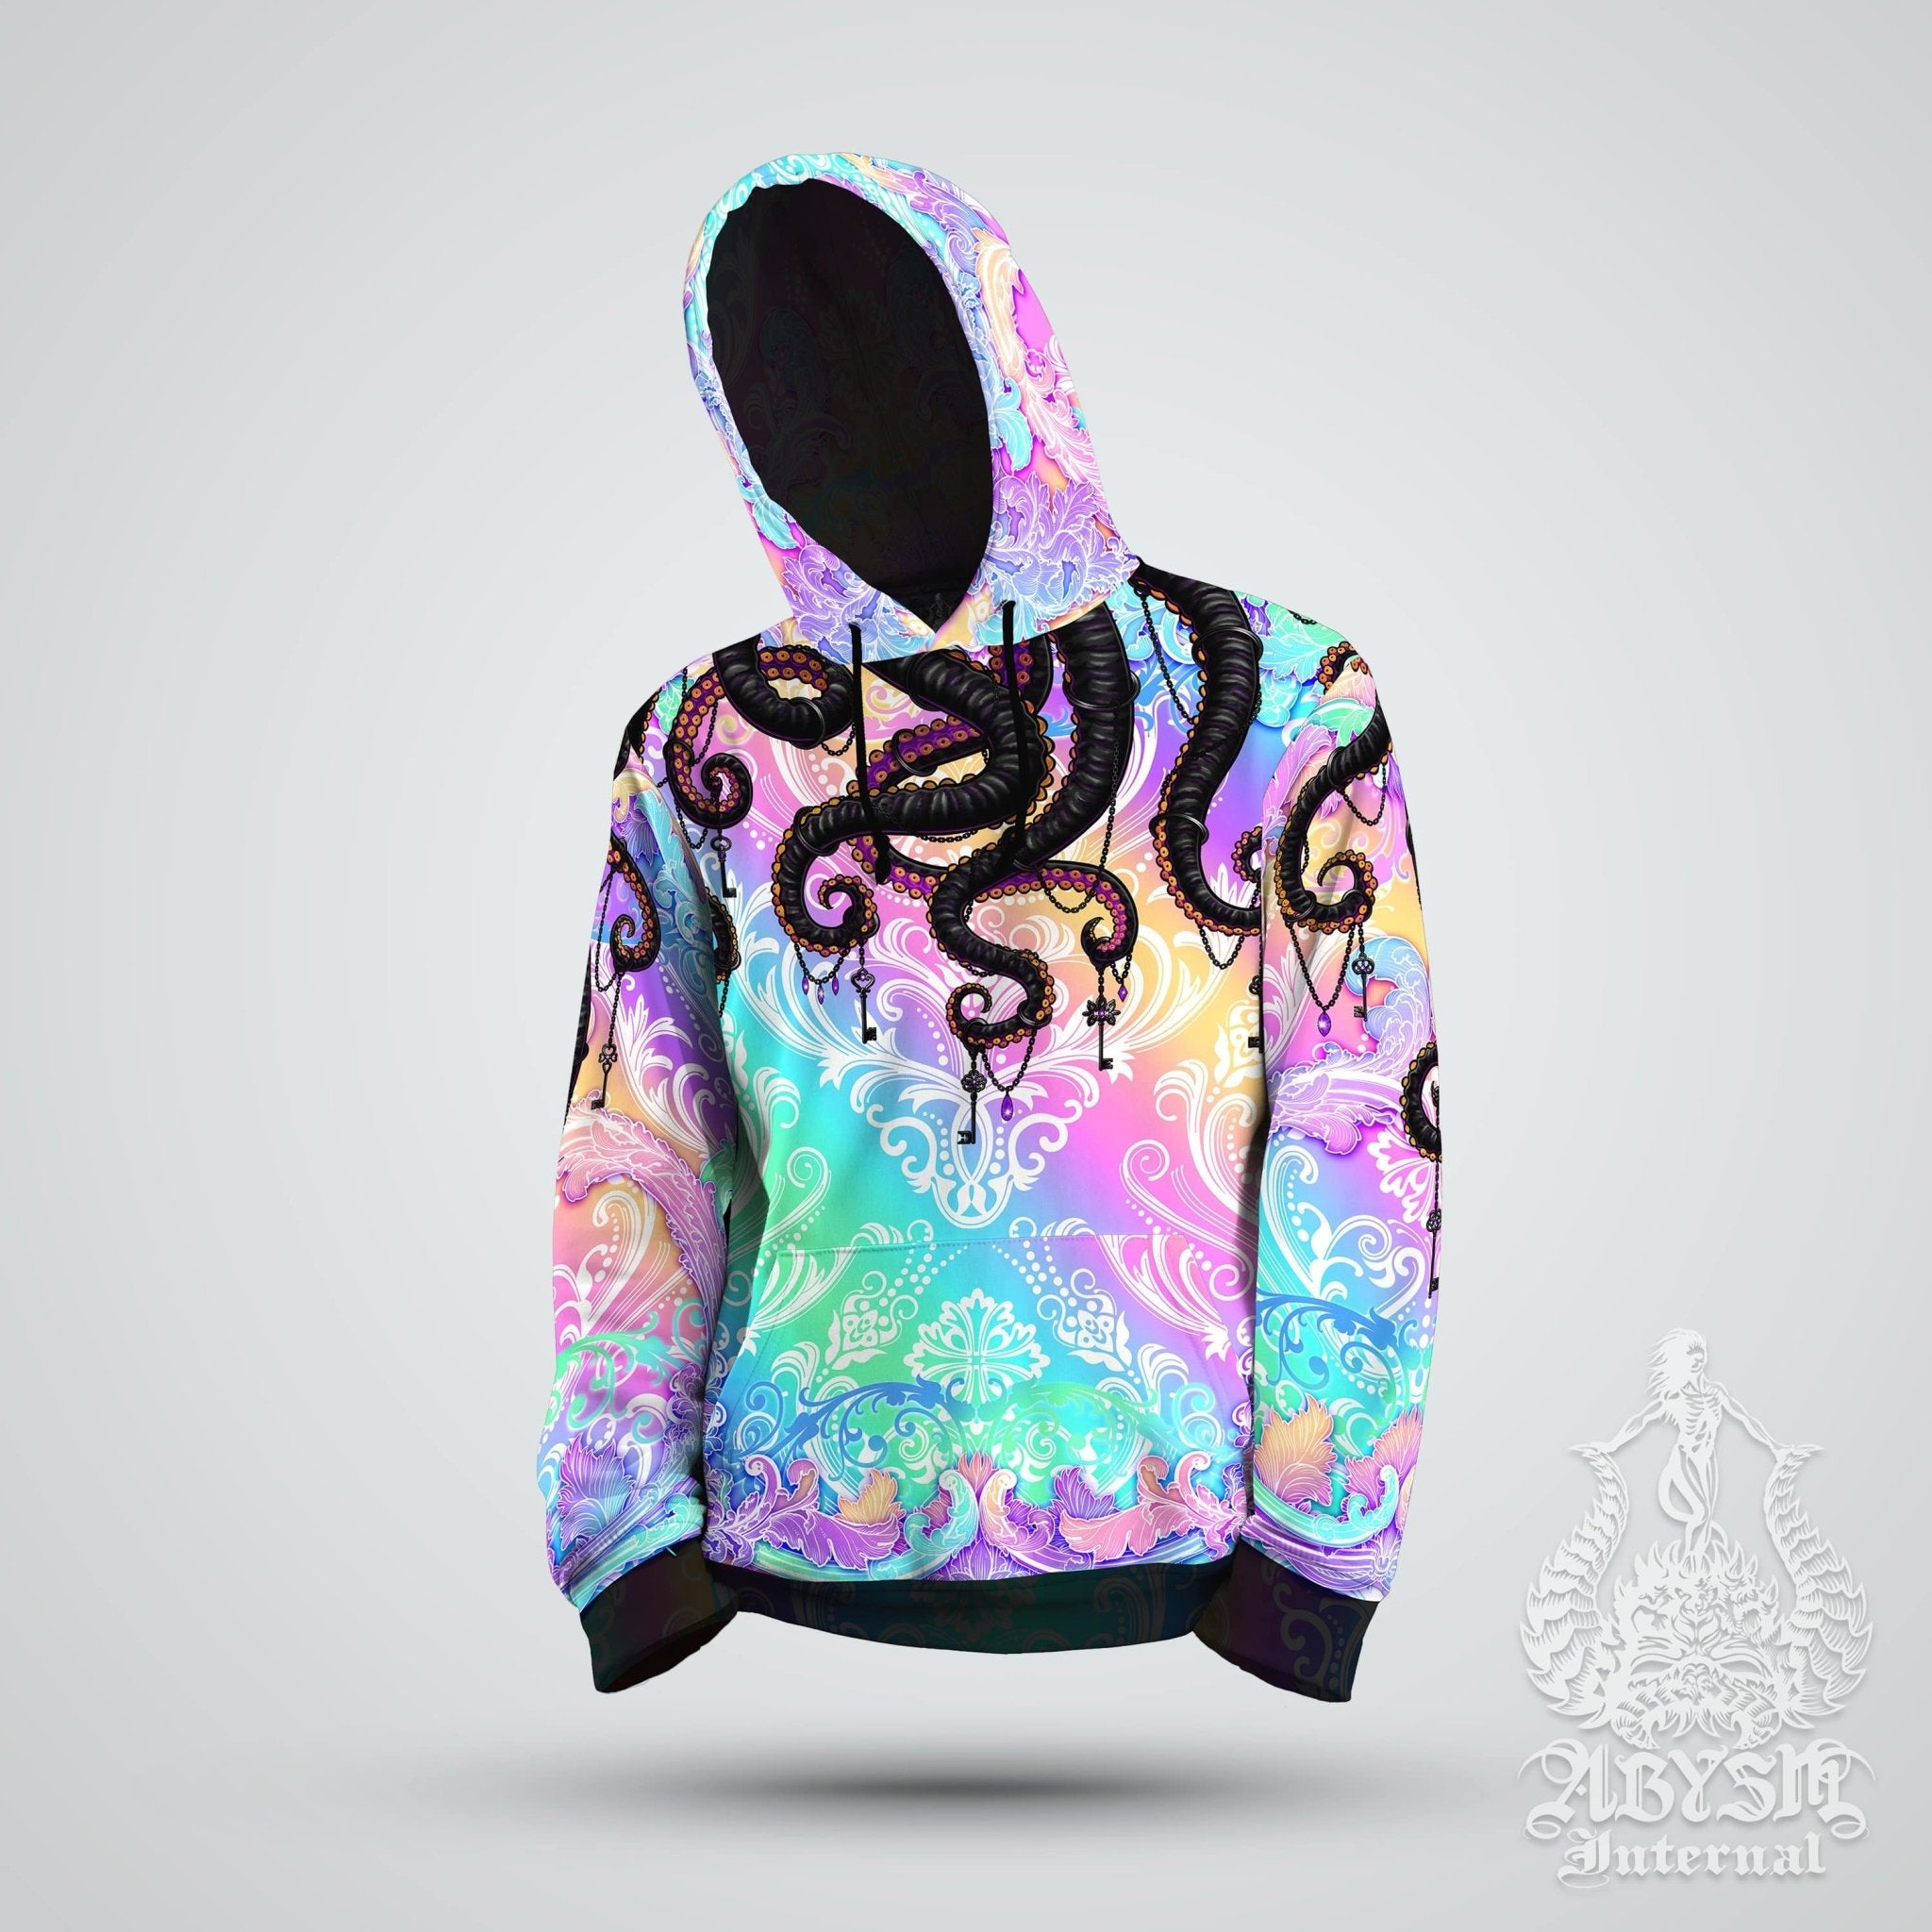 Trippy Hoodie, Psychedelic Streetwear, Rave Outfit, Aesthetic Festival Sweater, Holographic Clothing, Unisex - Pastel Punk Black Octopus - Abysm Internal